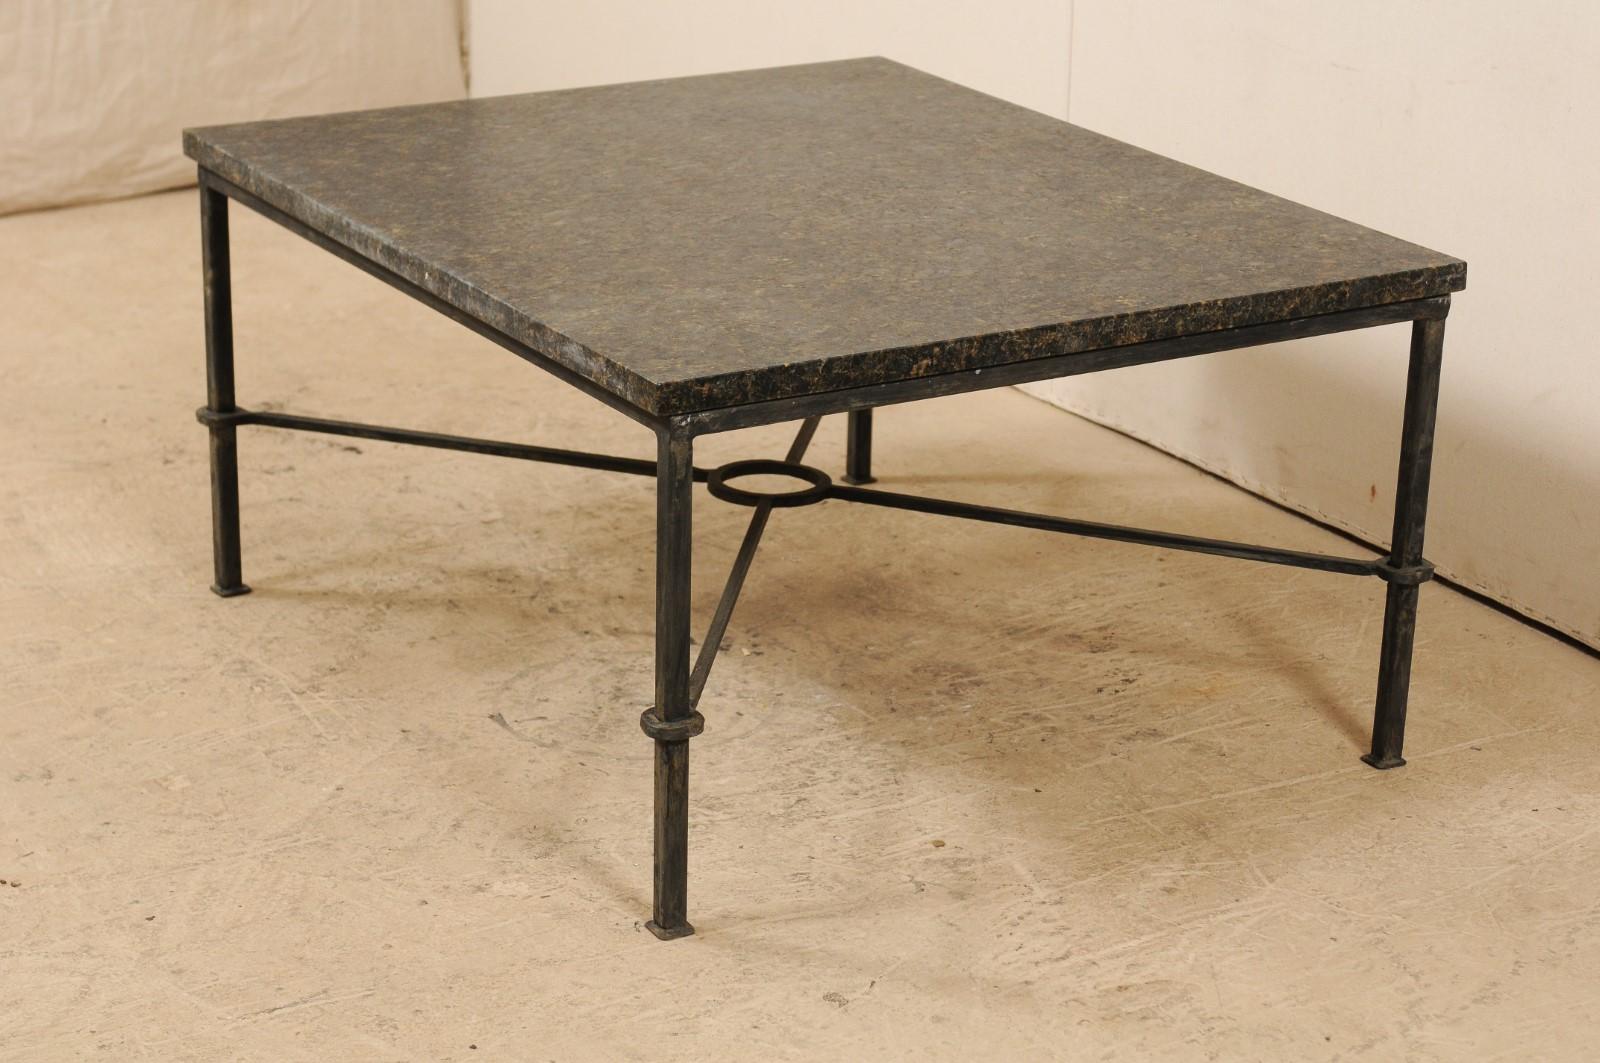 American Custom Coffee Table with Honed Granite Top and Black Iron Base